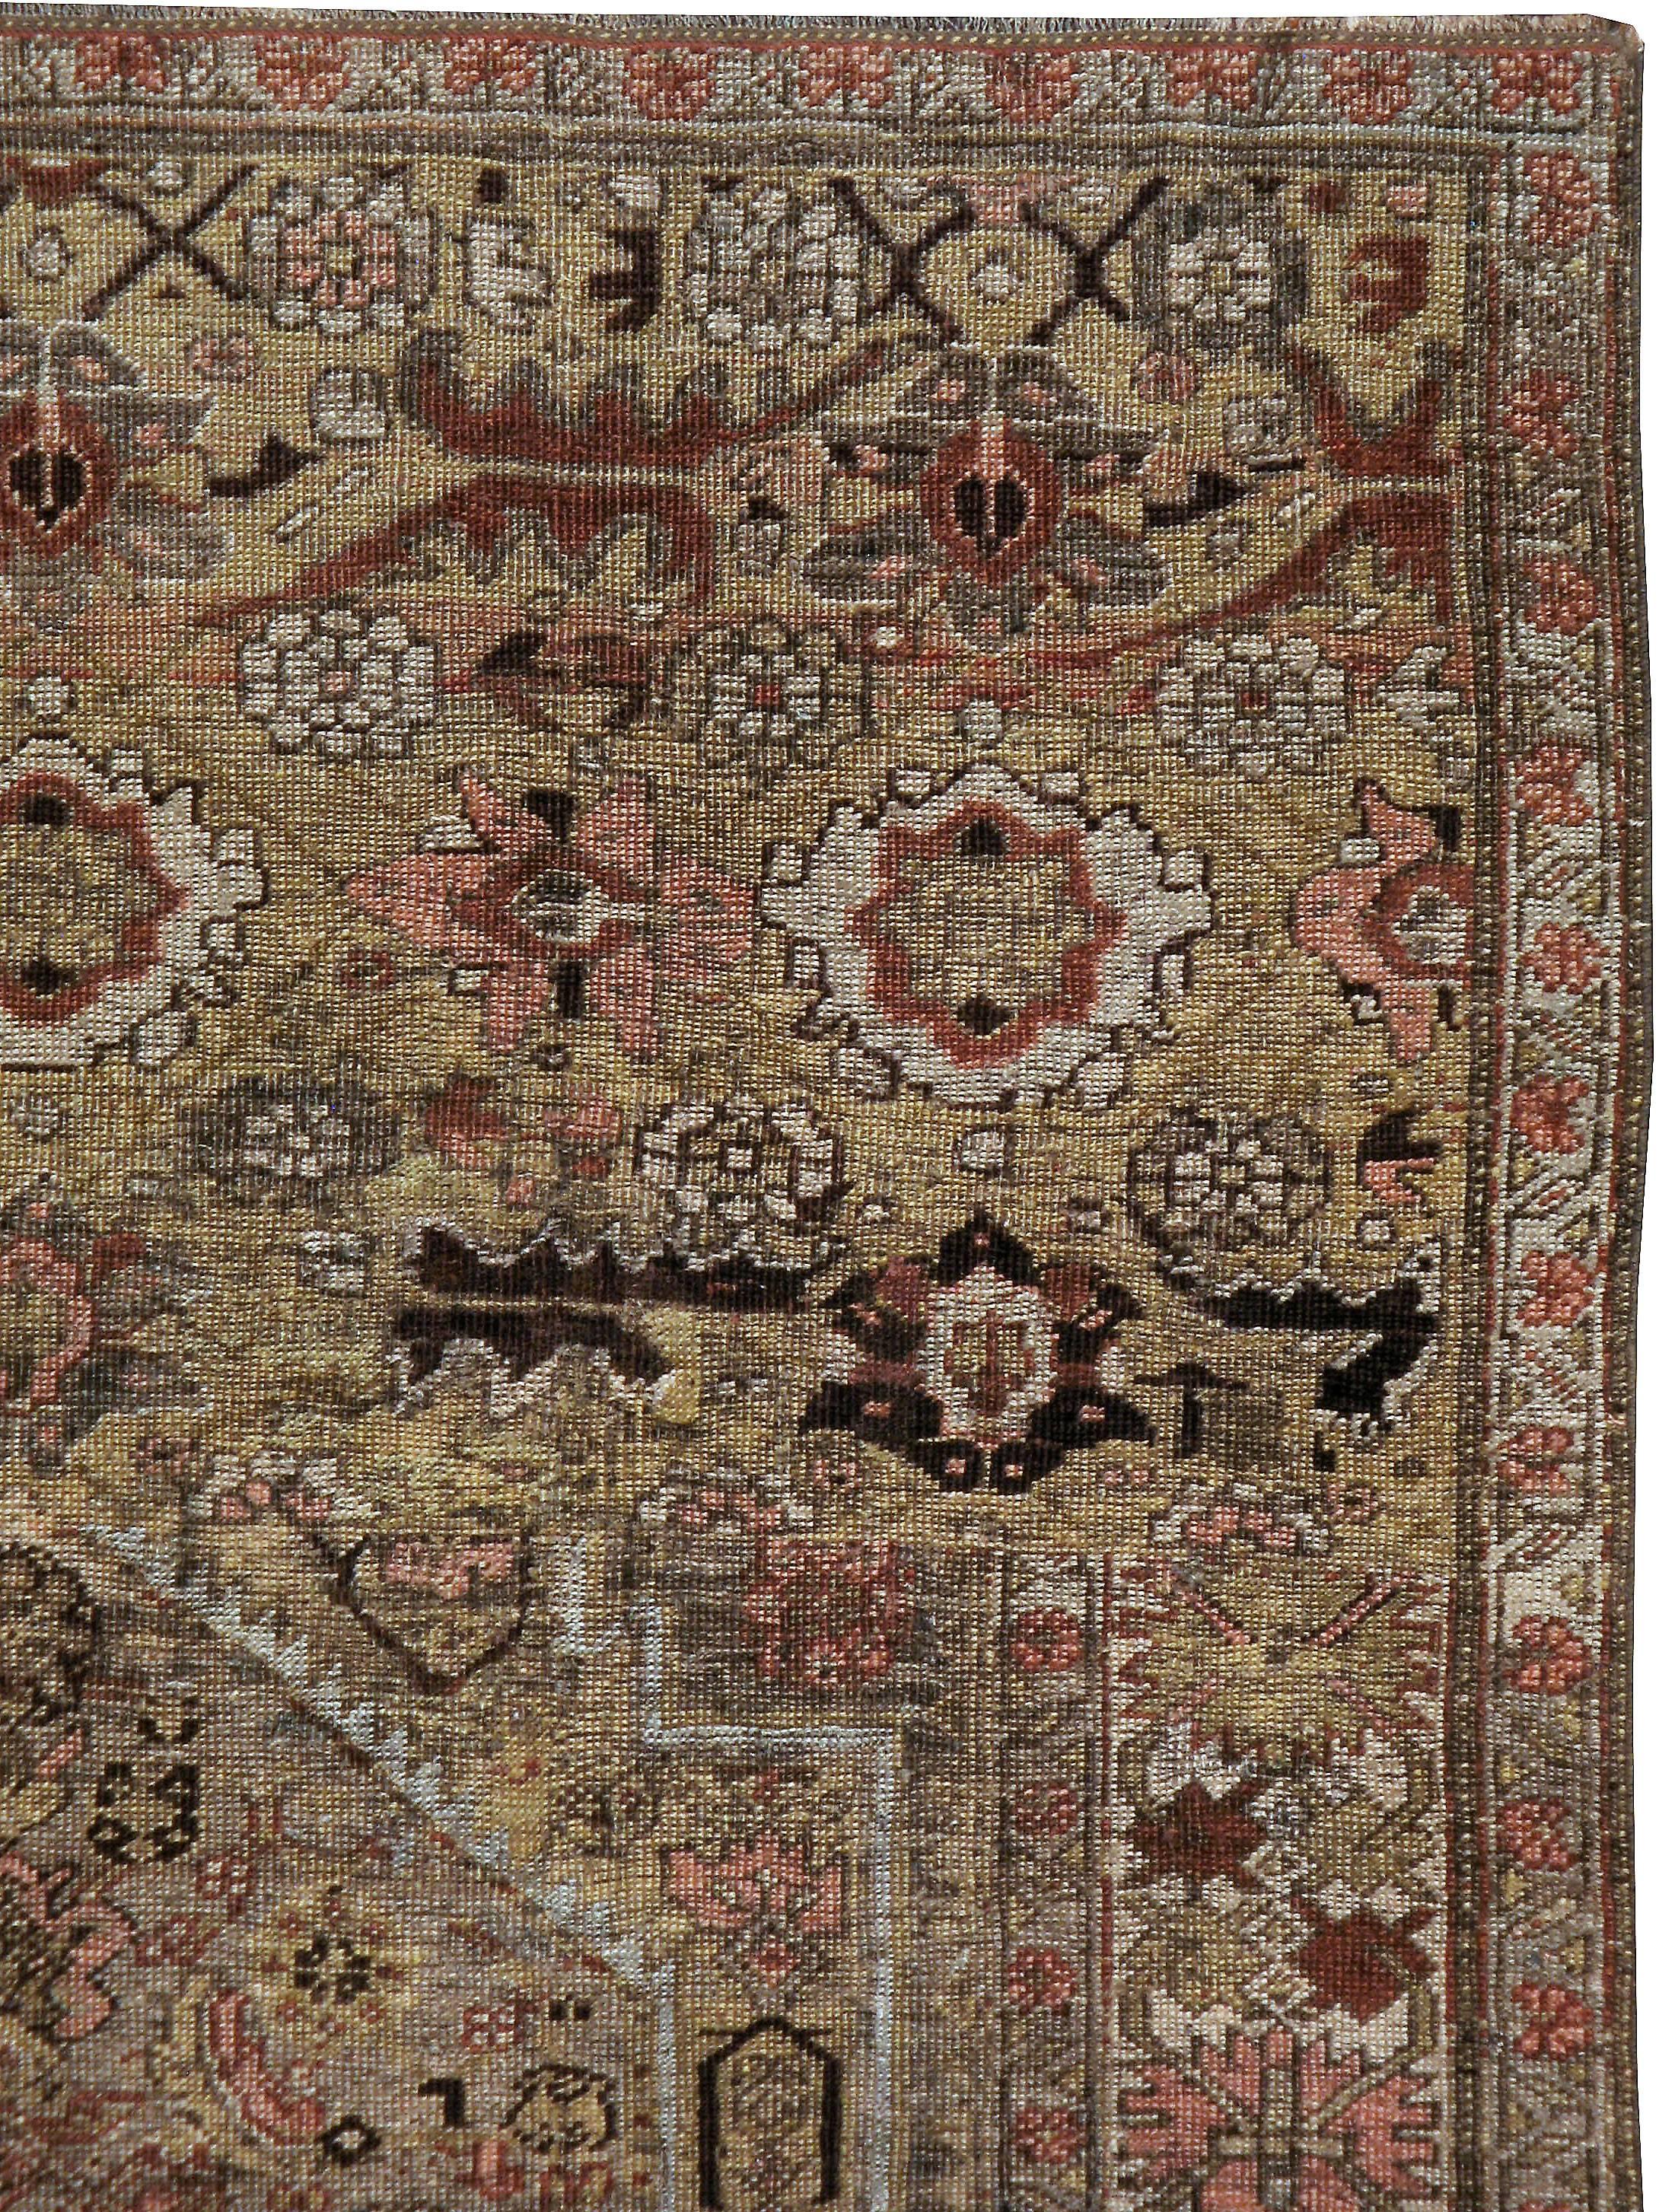 An antique Persian Bidjar carpet from the turn of the 20th century.